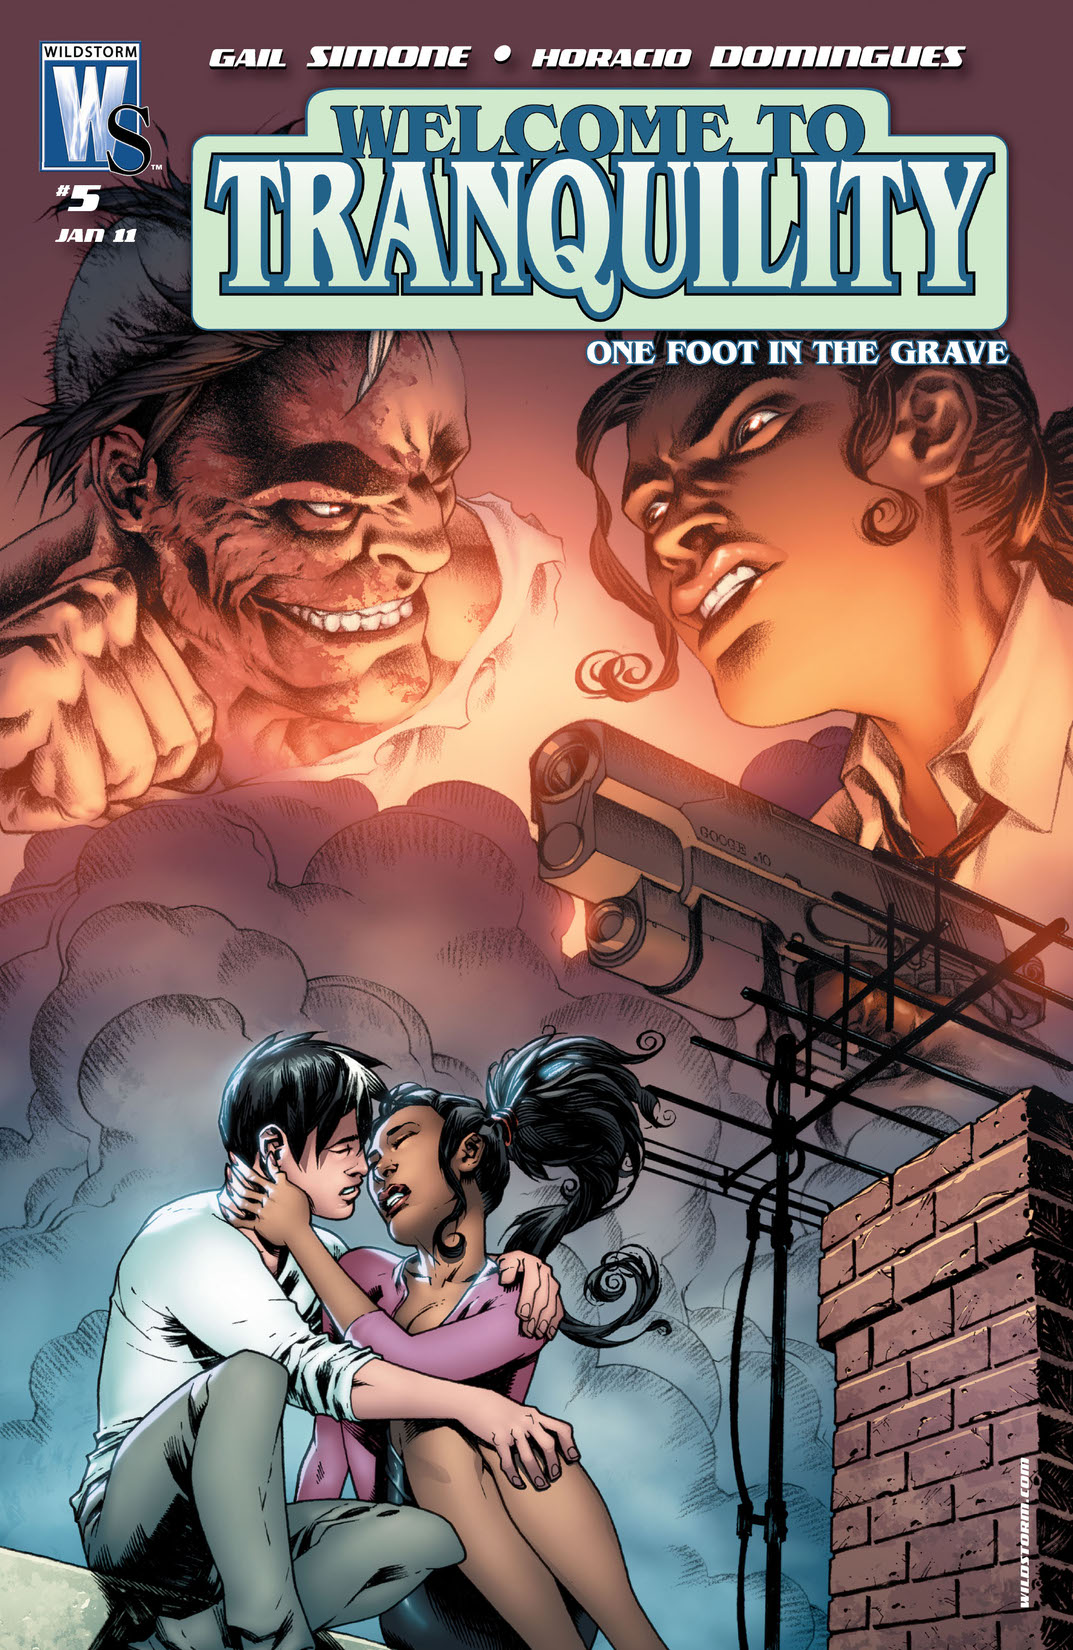 Welcome to Tranquility: One Foot in the Grave #5 preview images